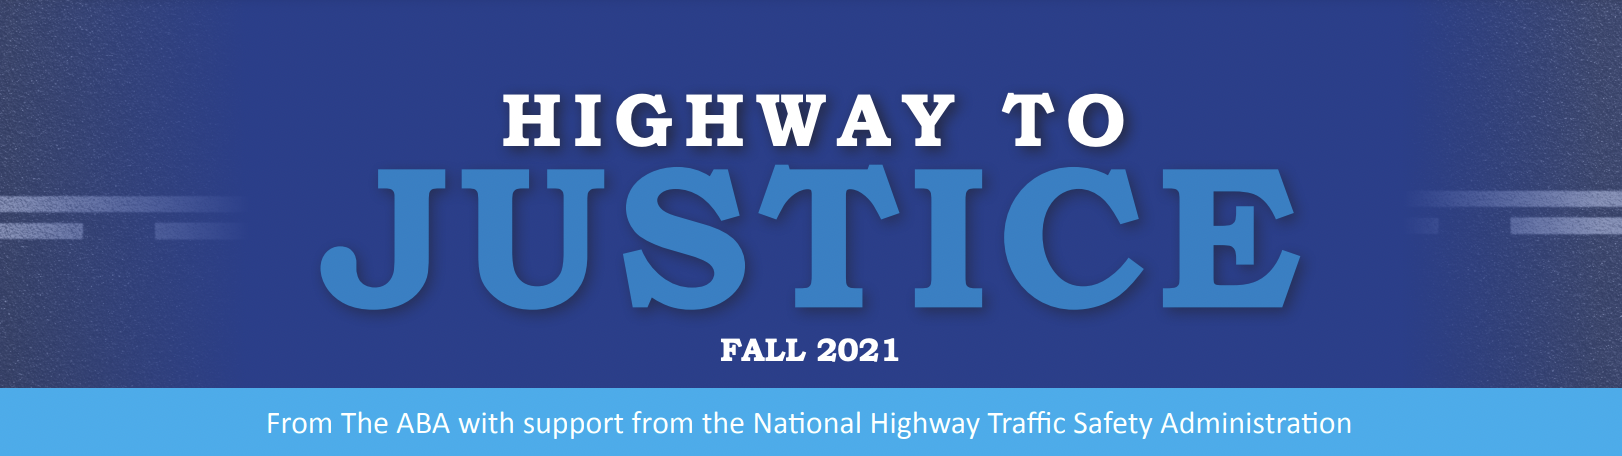 Highway to Justice detail image